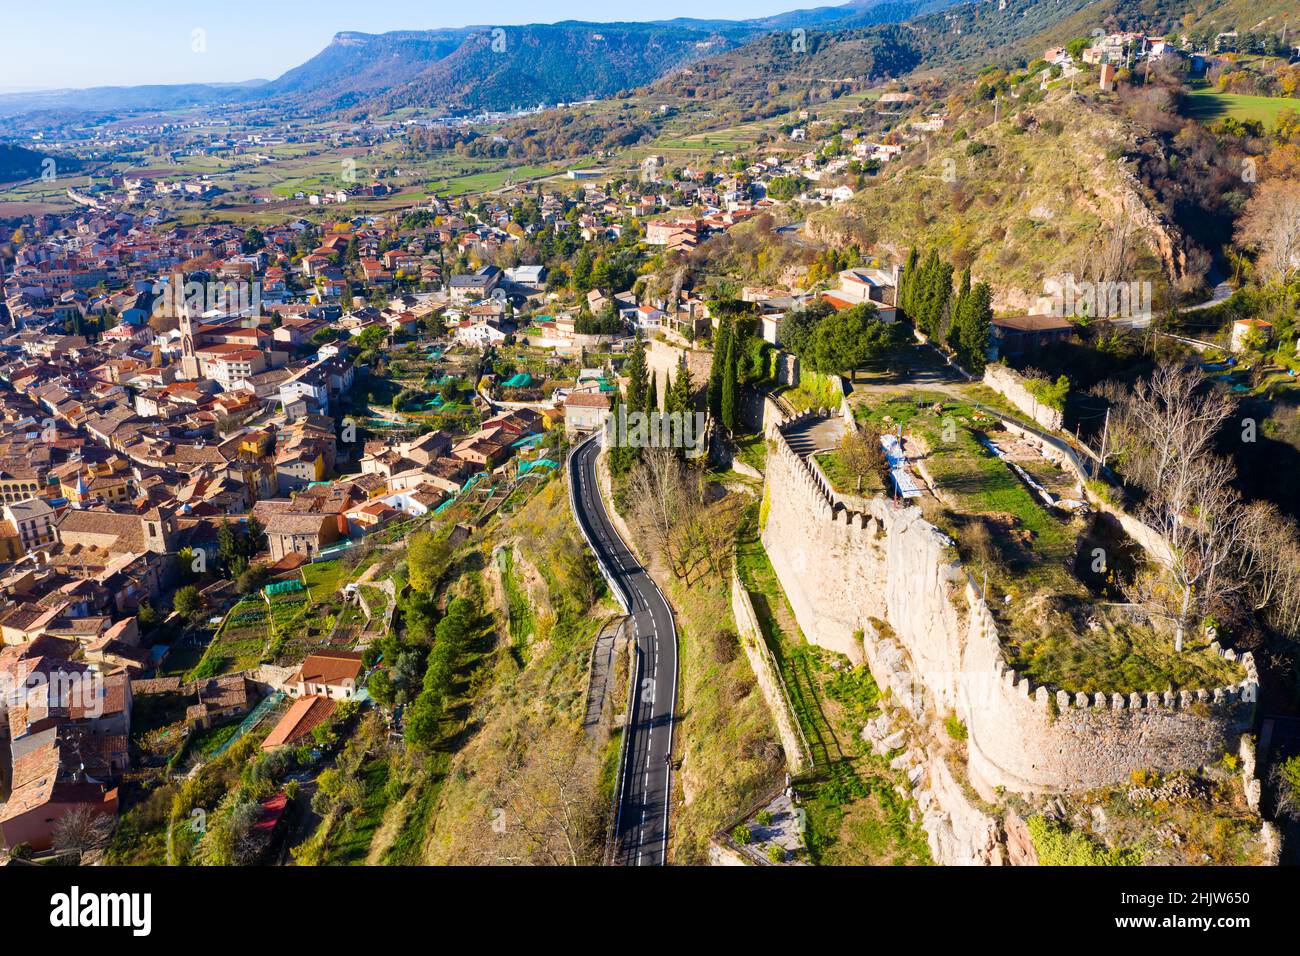 Top view of the city of Berga on the slopes of the Pyrenees mountains. pain Stock Photo